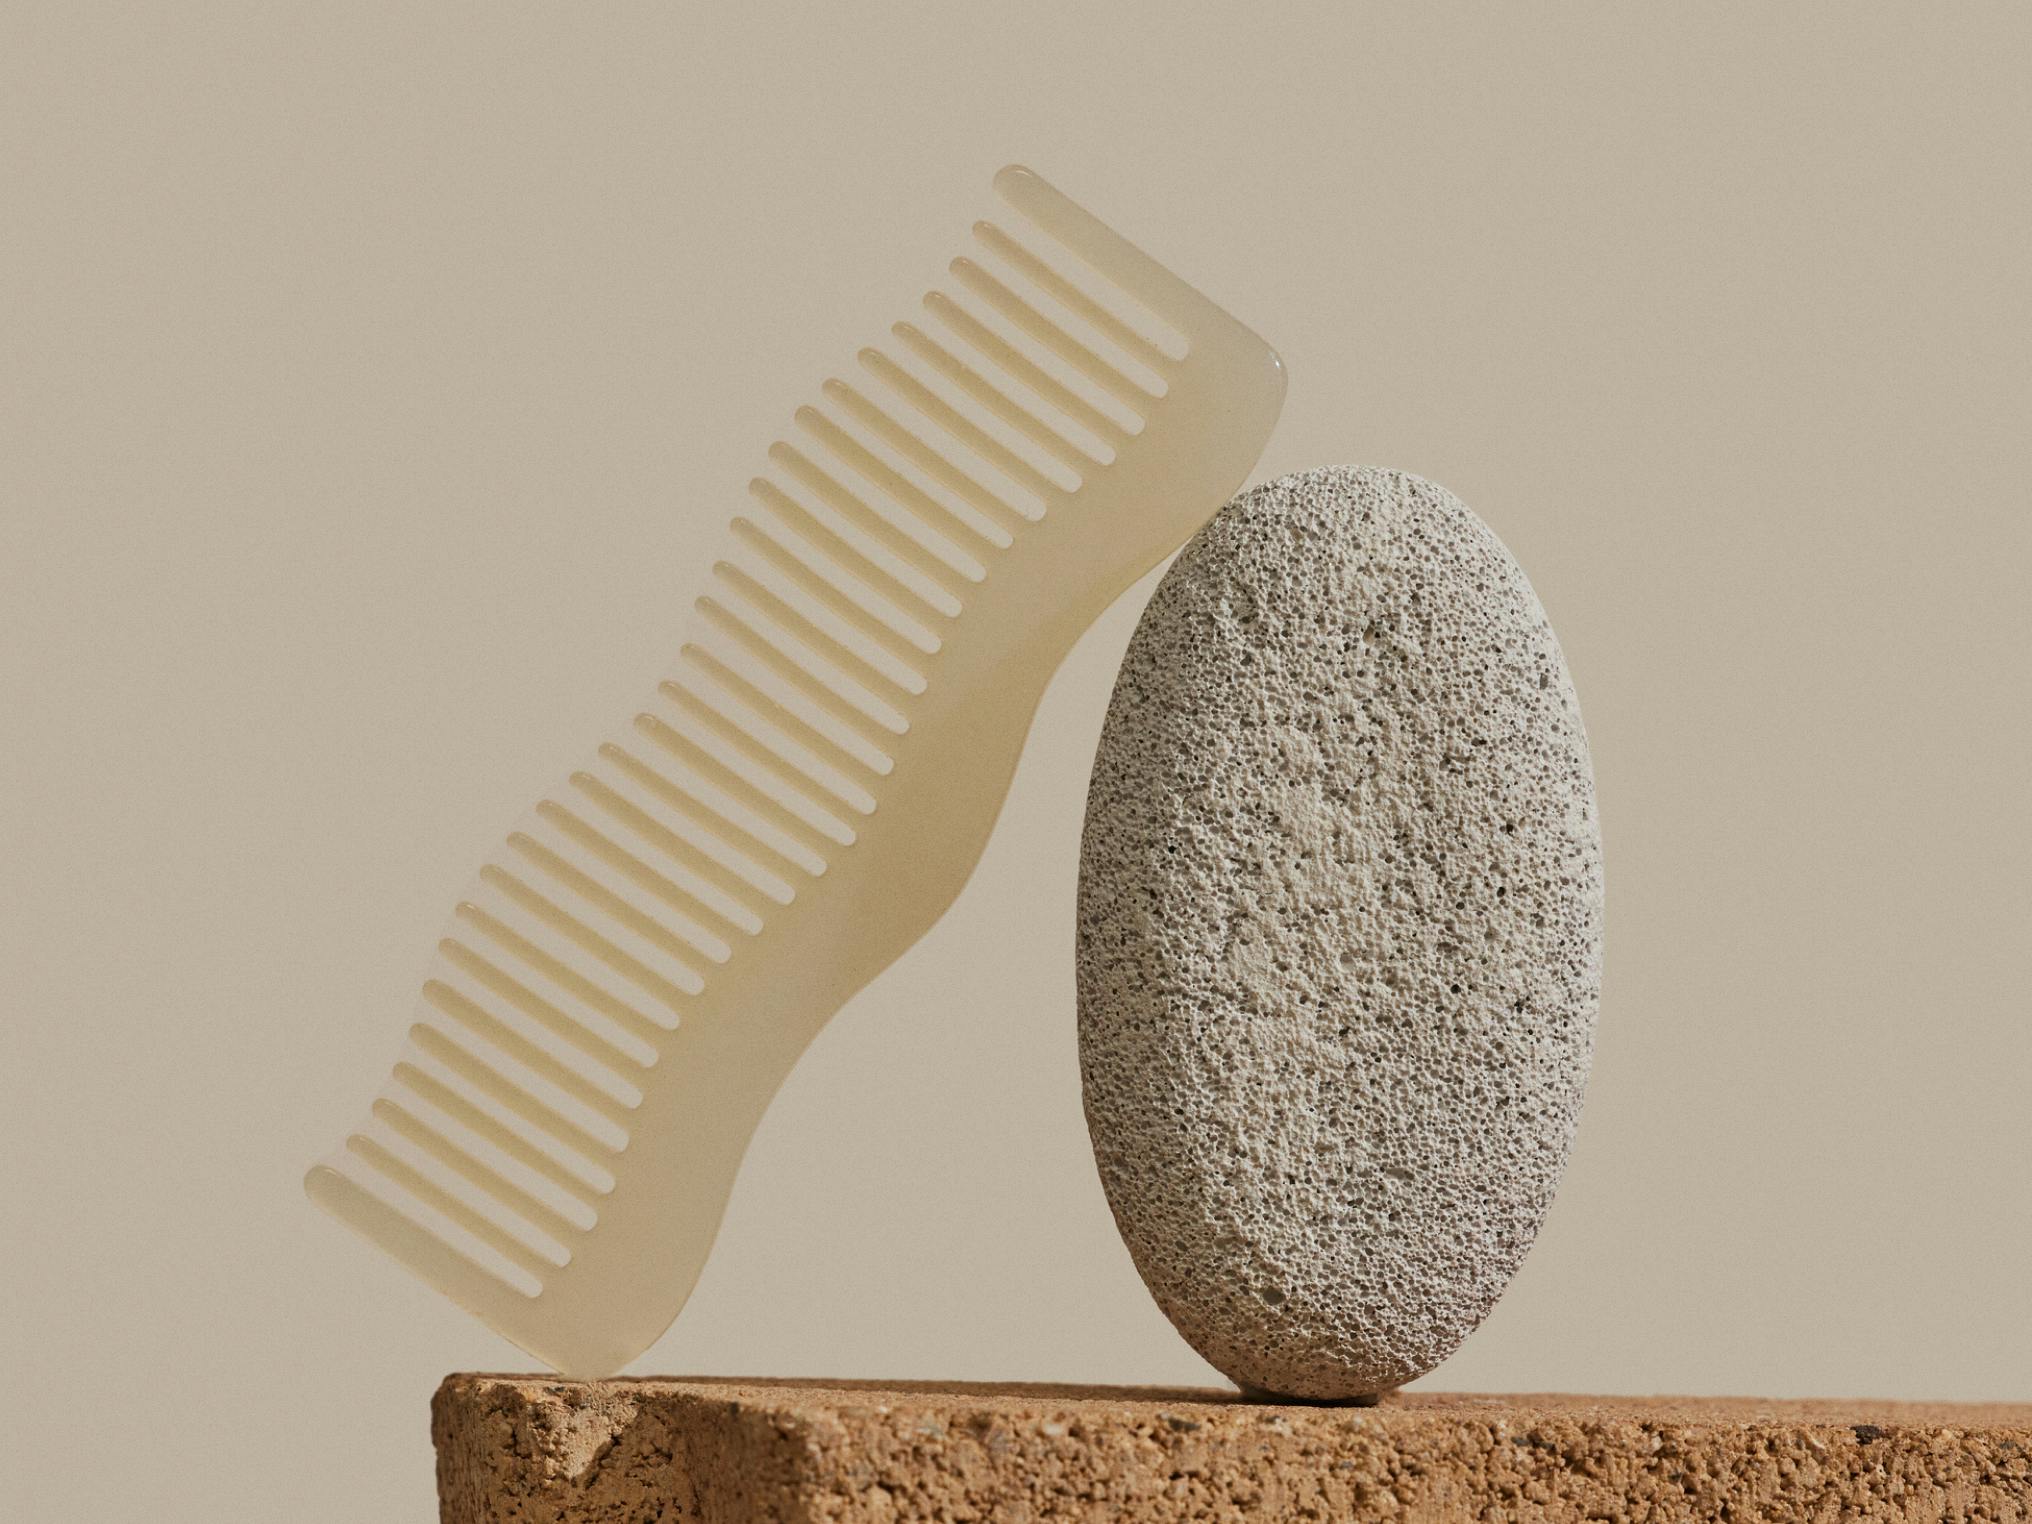 a beige hair comb propped up on a pumice stone, sitting on a tan stone surface